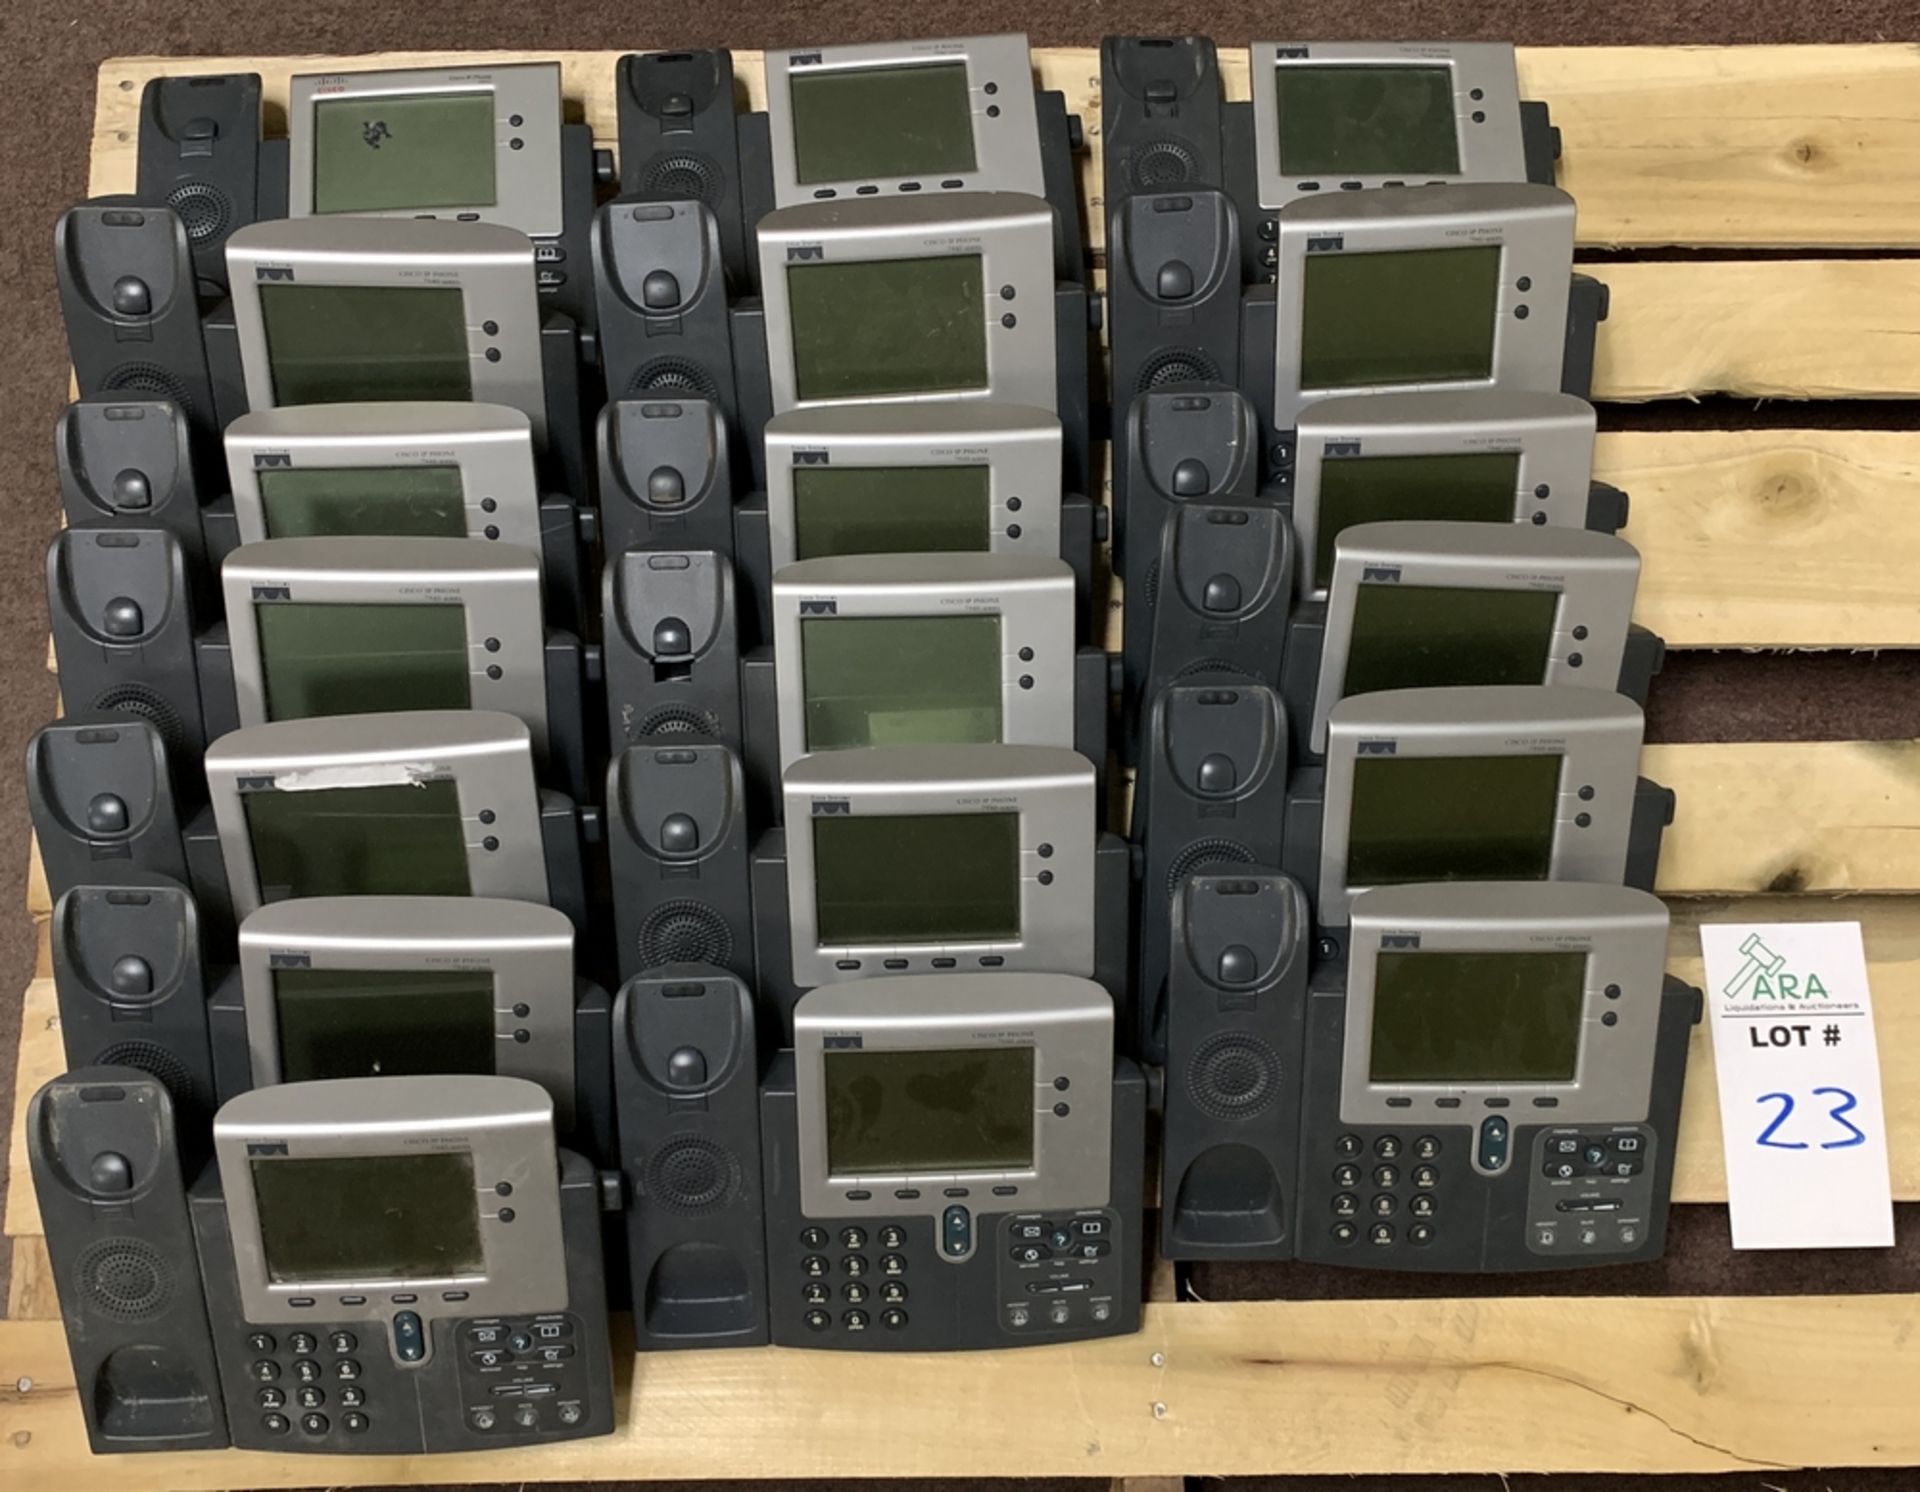 19 CISCO PHONE SYSTEMS - MODEL 7940 ALL ITEMS ARE SOLD AS IS UNTESTED BUT CAME FROM A WORKING